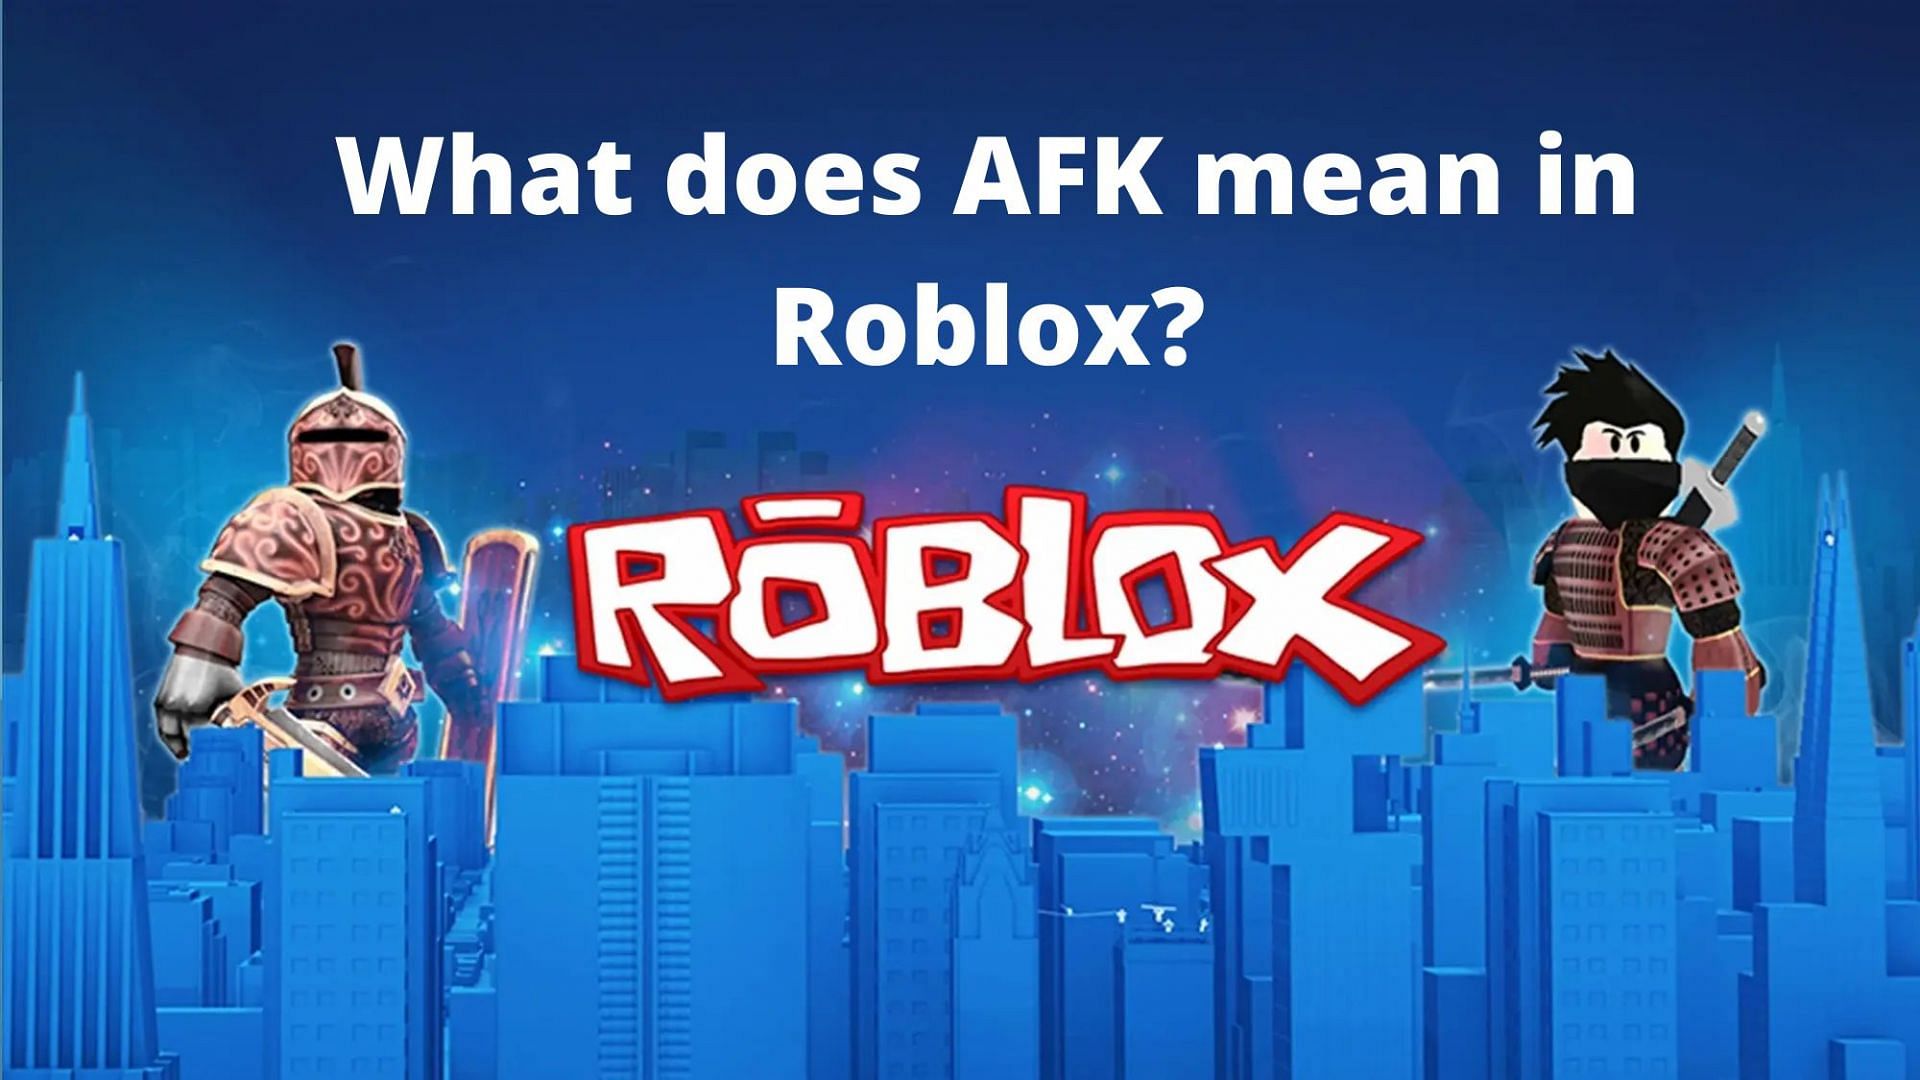 What Does Afk Mean In Gaming And Online Culture?